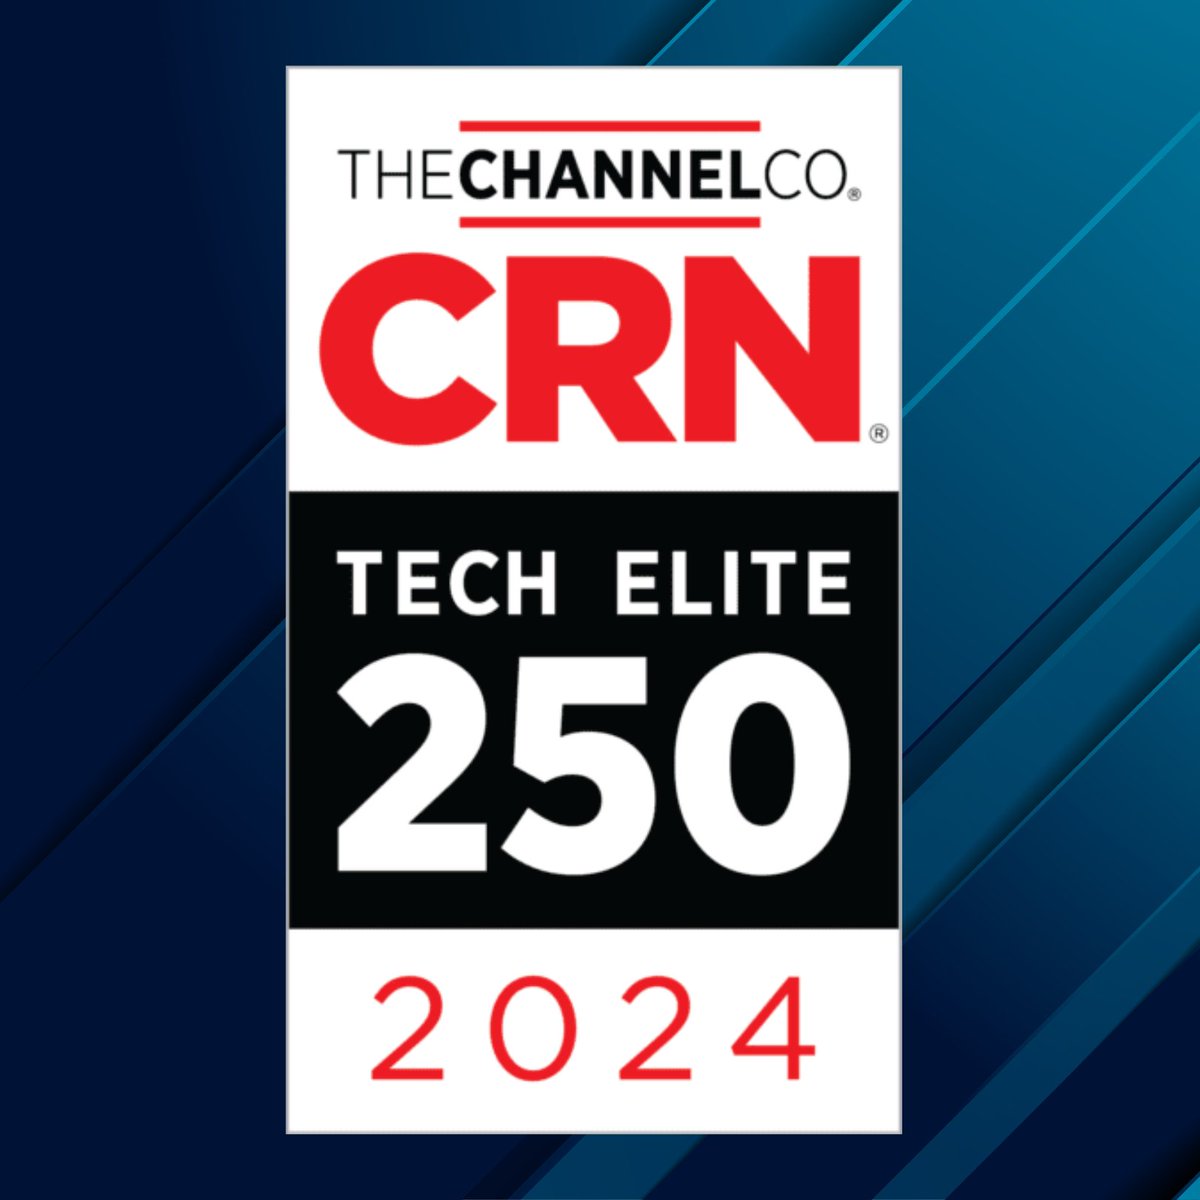 CATS Technology once again has been recognized on the 2024 CRN Tech Elite 250 List! Our dedication to cutting-edge solutions continue to fuel our mission of delivering unparalleled innovation and value to our clients! 💻❤️ #MSP #TechElite #ManagedIT ow.ly/swvx50Rnbva